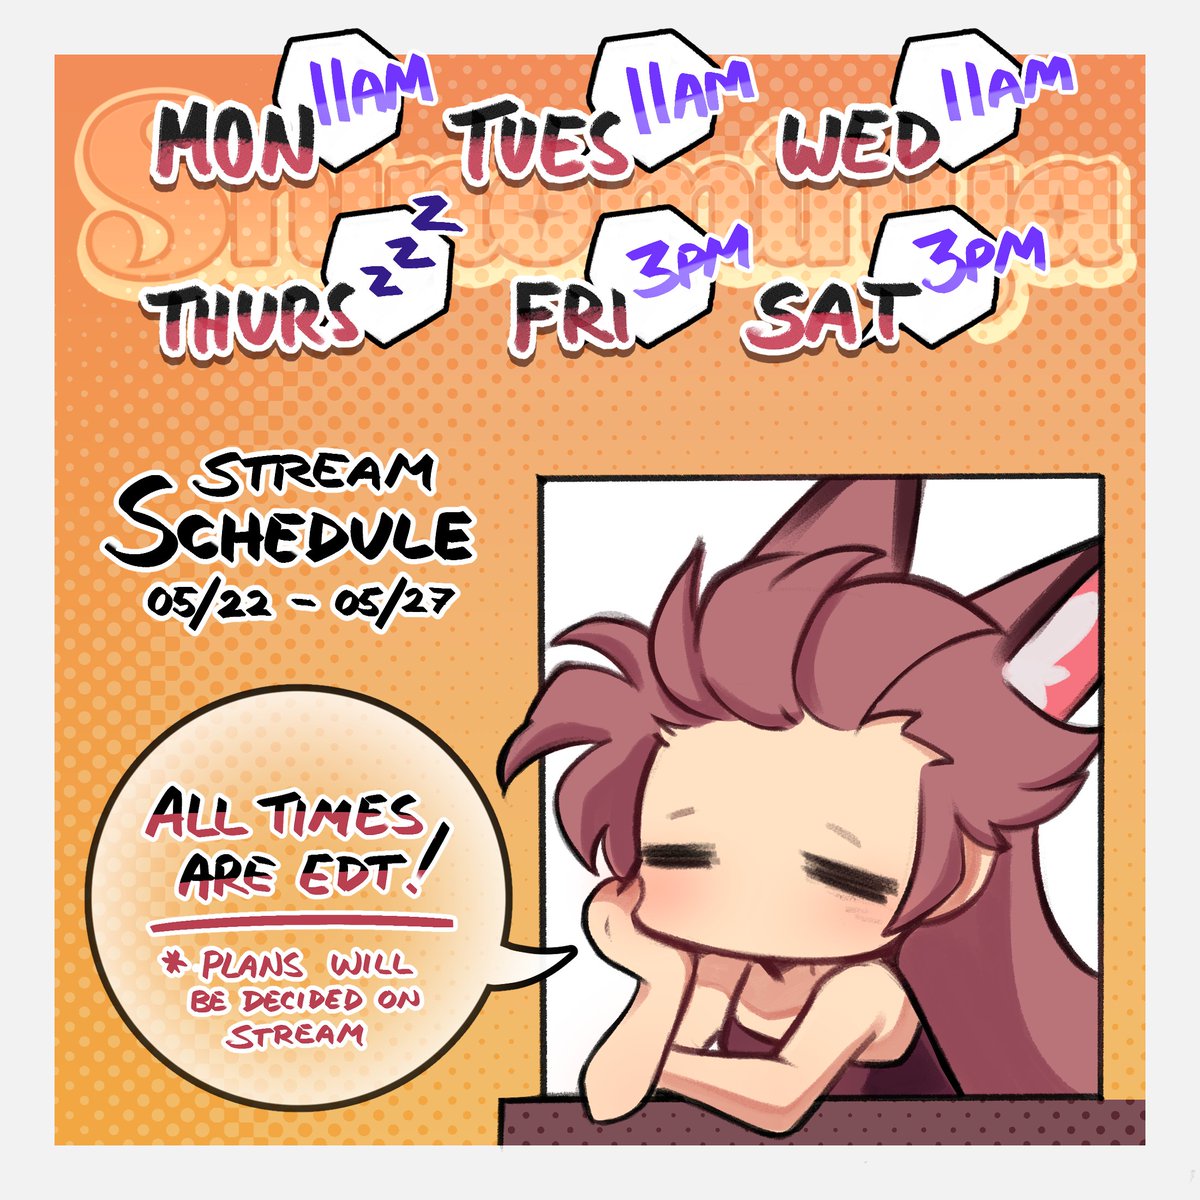 ☀️ Stream Schedule 05/22 - 05/27 ☀️  I'm in dire need of sunlight so expect some early streams this week~